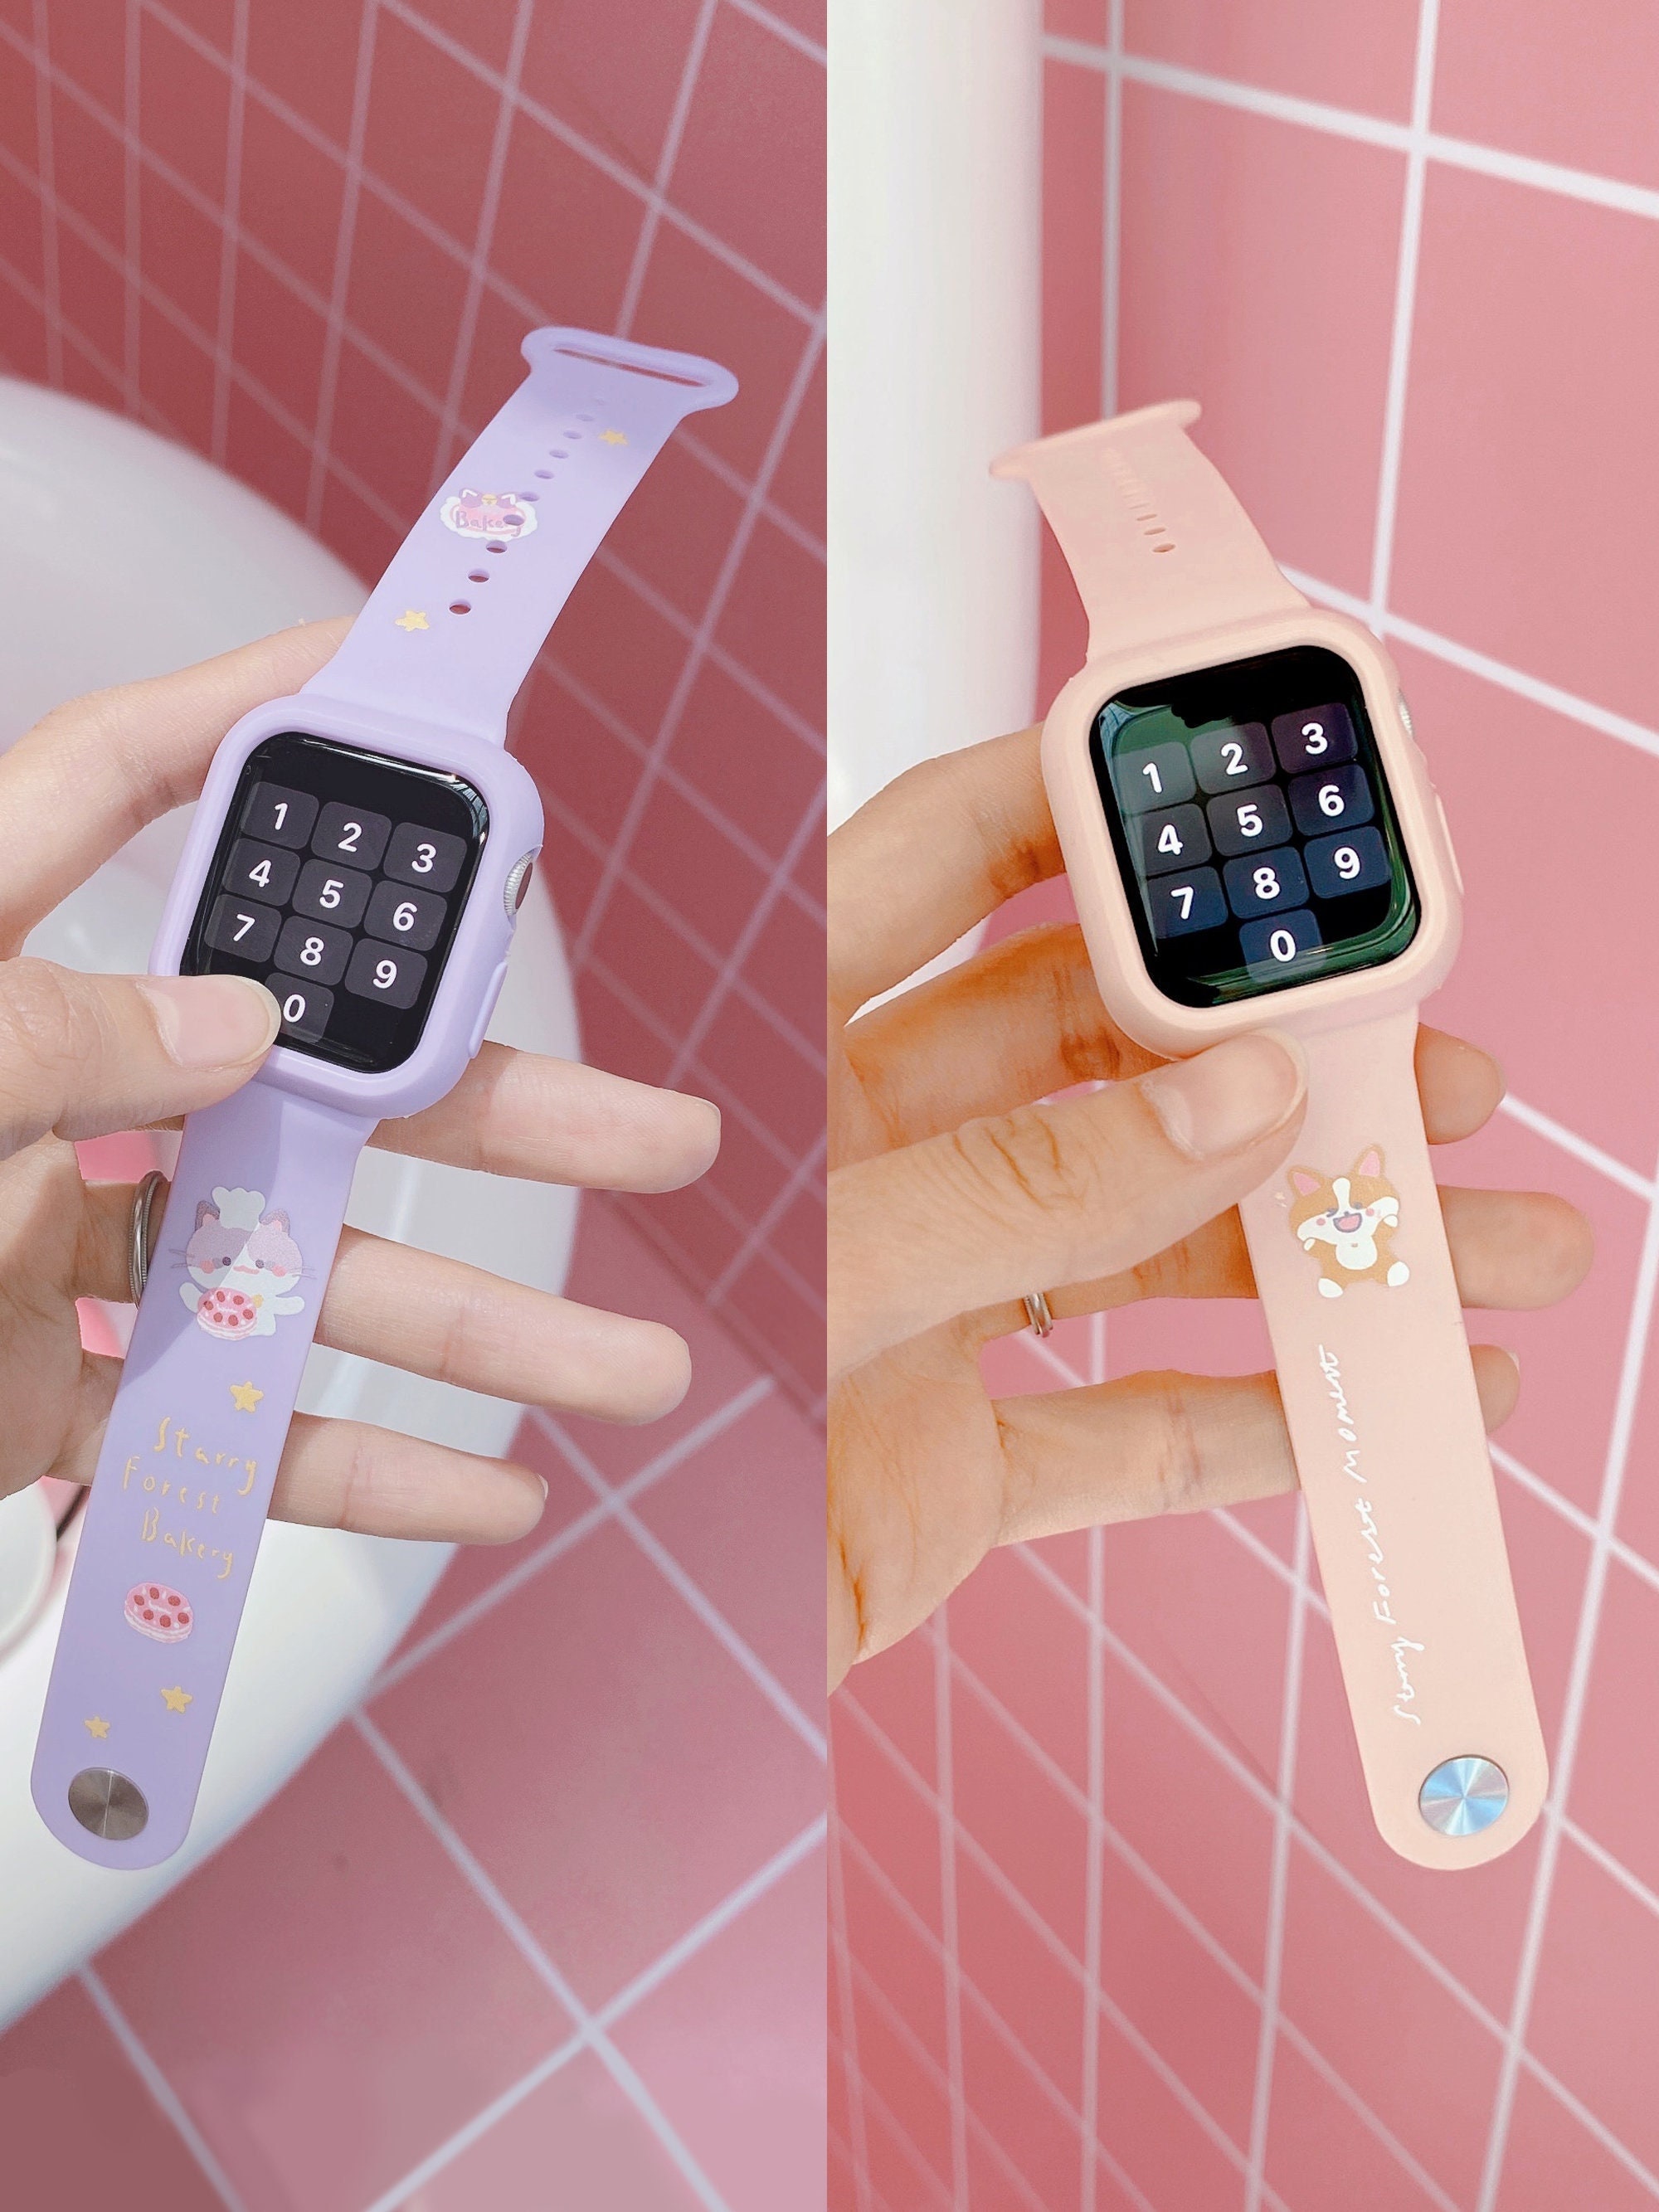 Personalise Water Proof Creativity The silicone Strap Custommake Decoration  Texture Free Curve Cute watches strap for apple watch band,for women men  kids children adoutls teeny elder